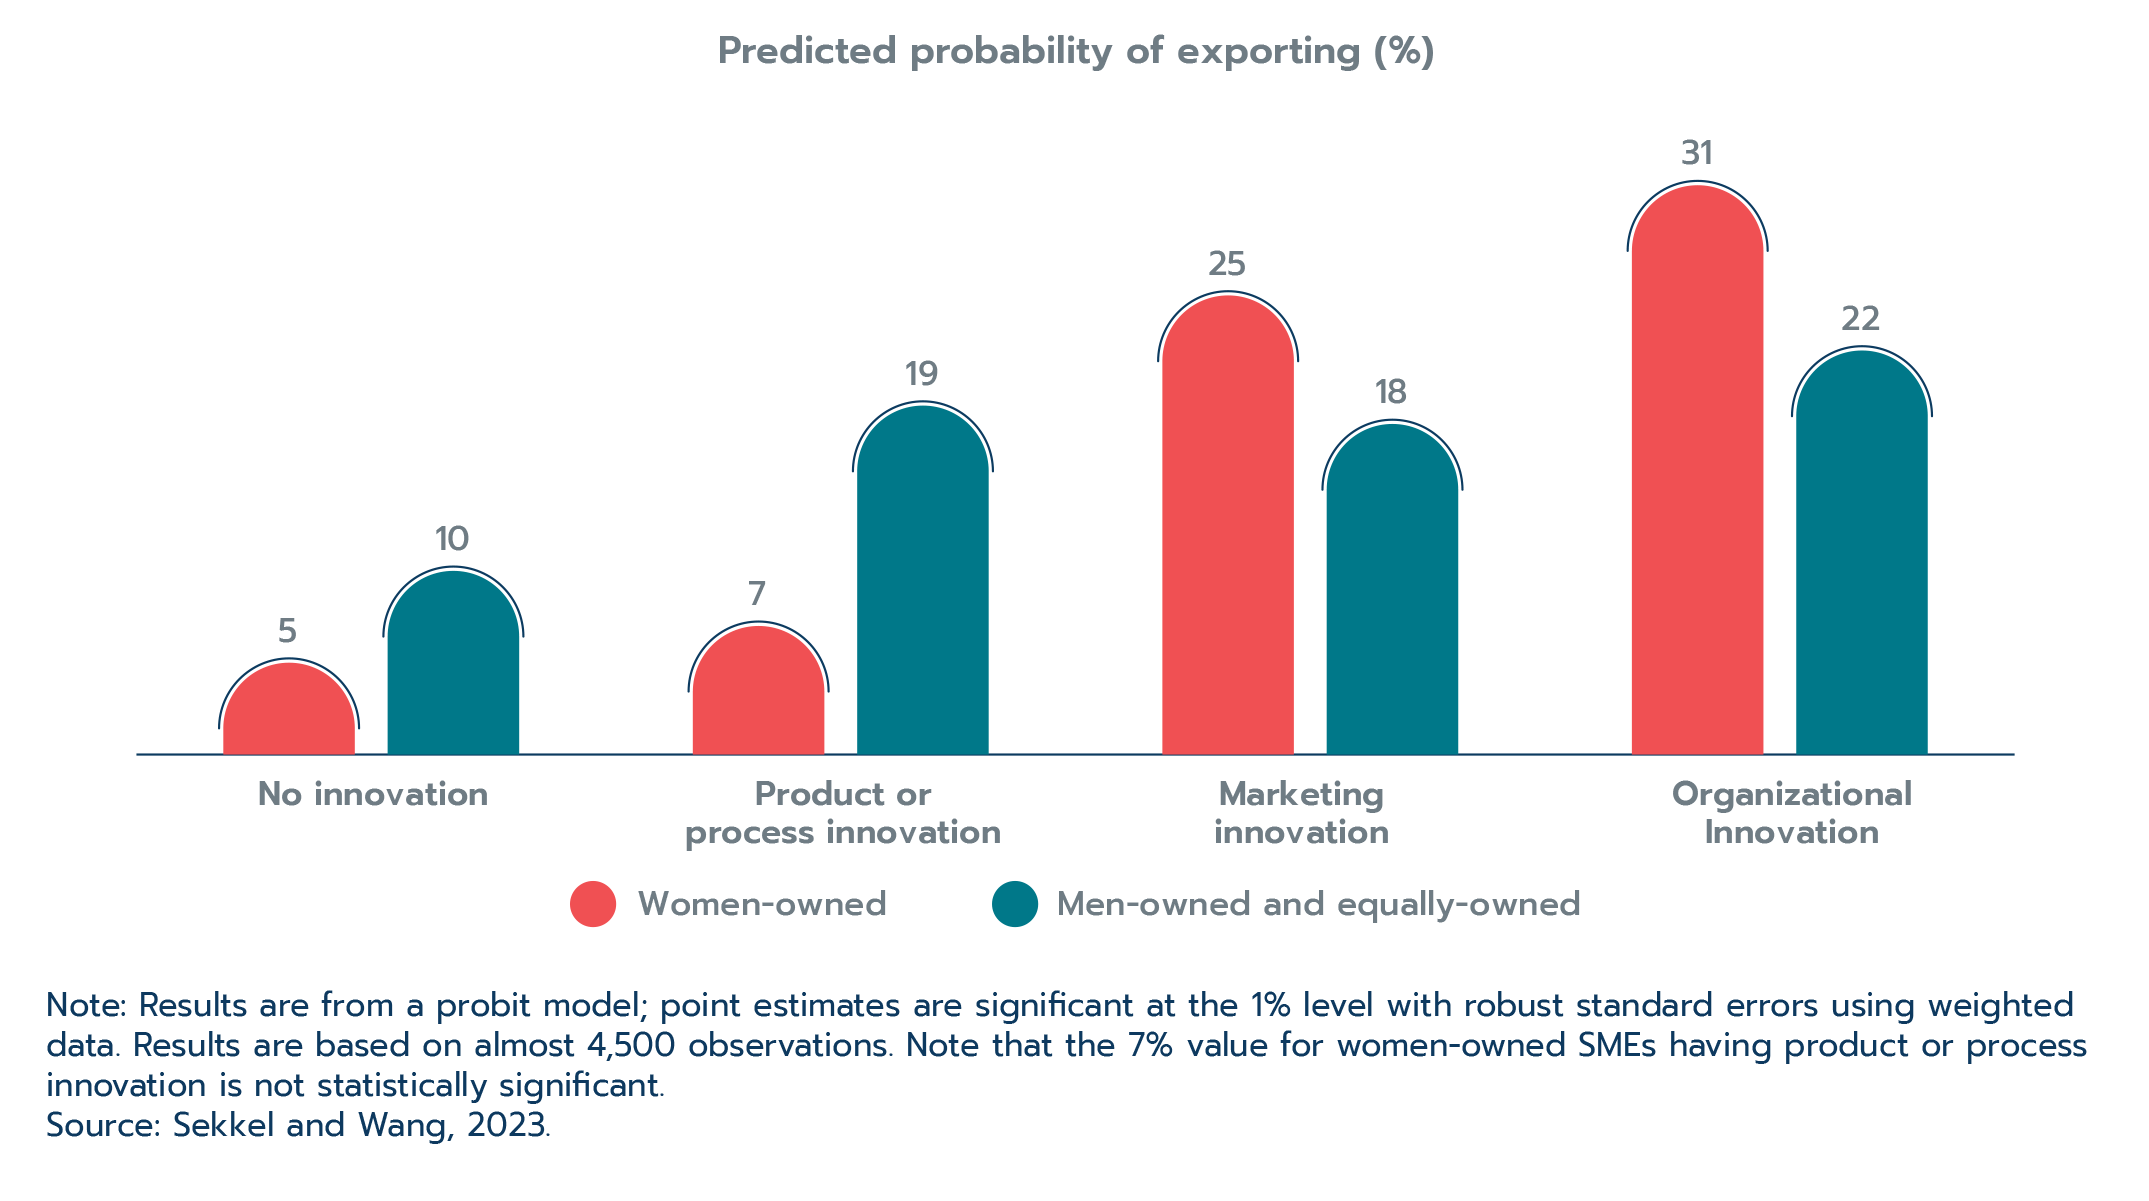 Figure 2.25: Importance of innovation for exporting SMEs, by gender